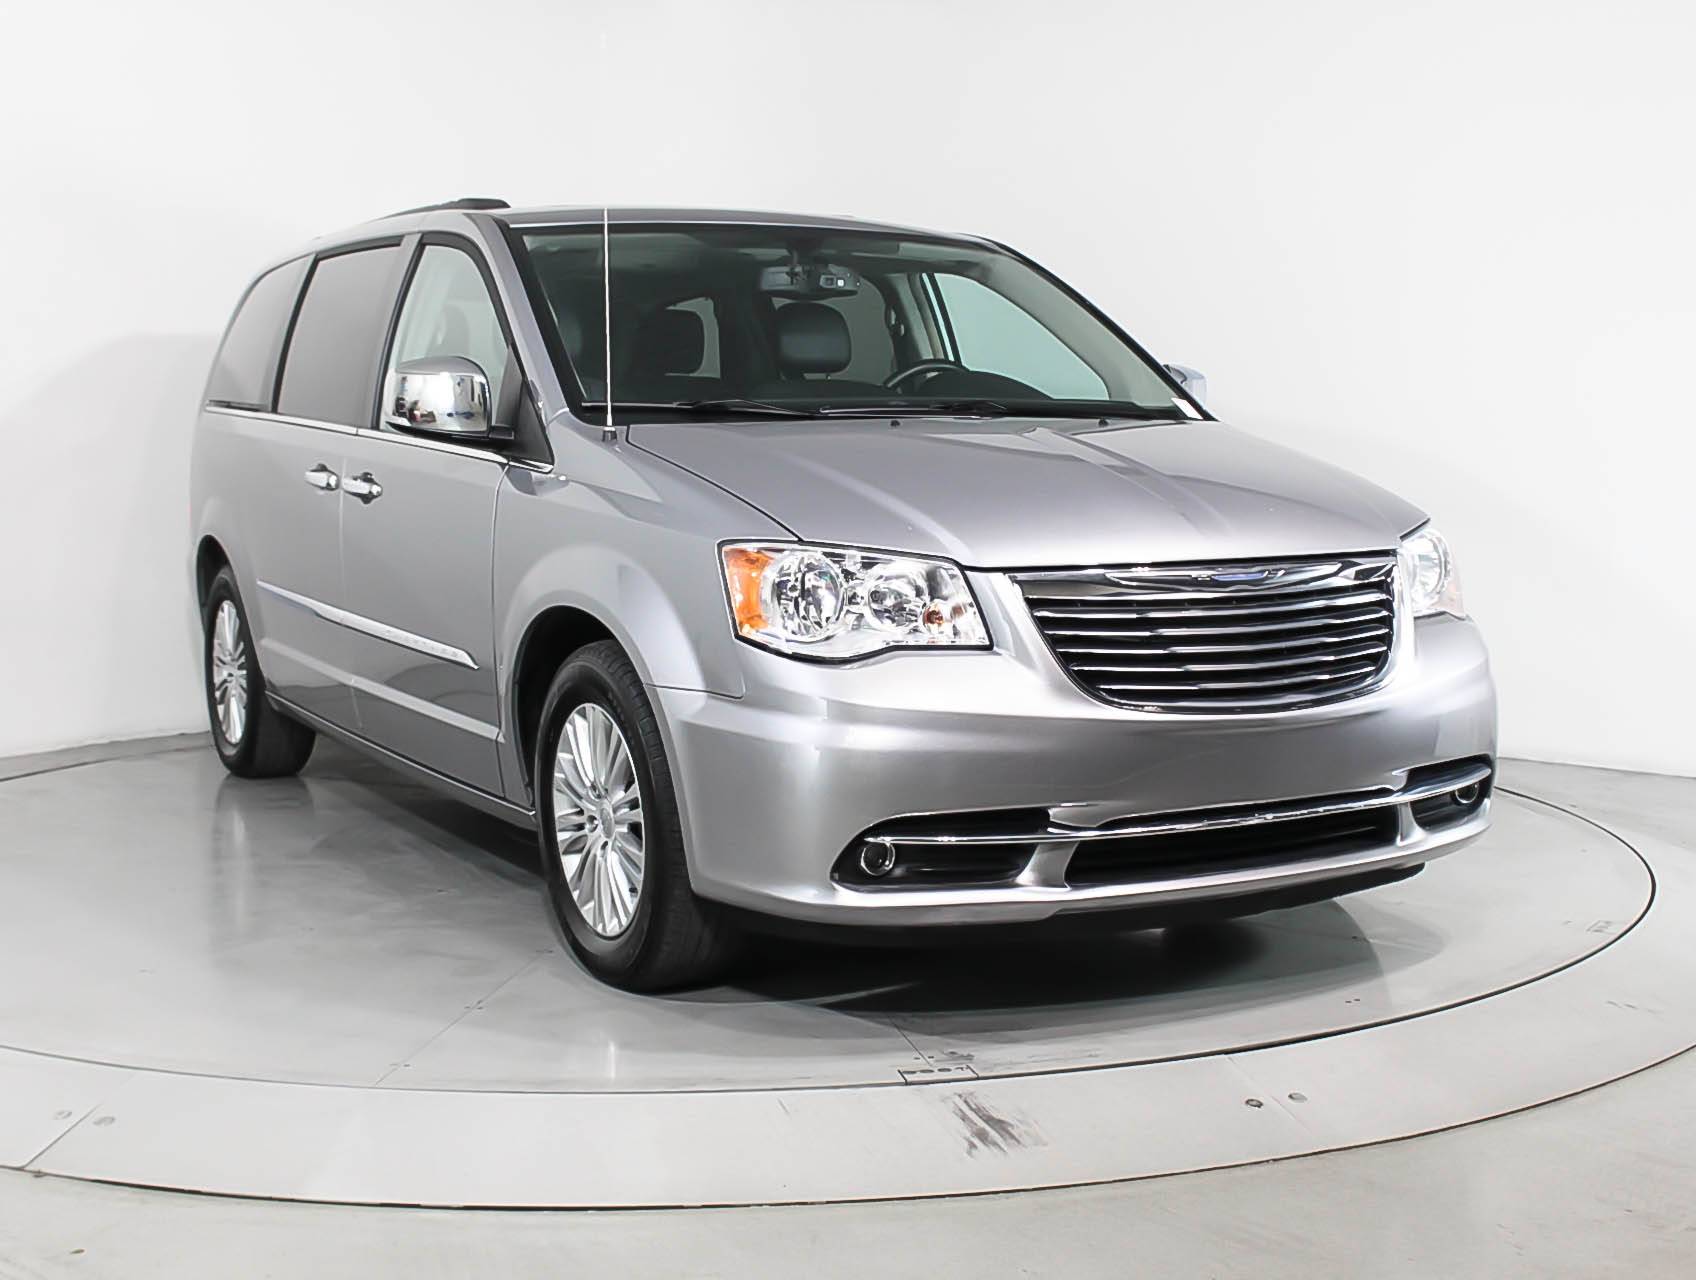 Florida Fine Cars - Used CHRYSLER TOWN & COUNTRY 2015 MARGATE TOURING L